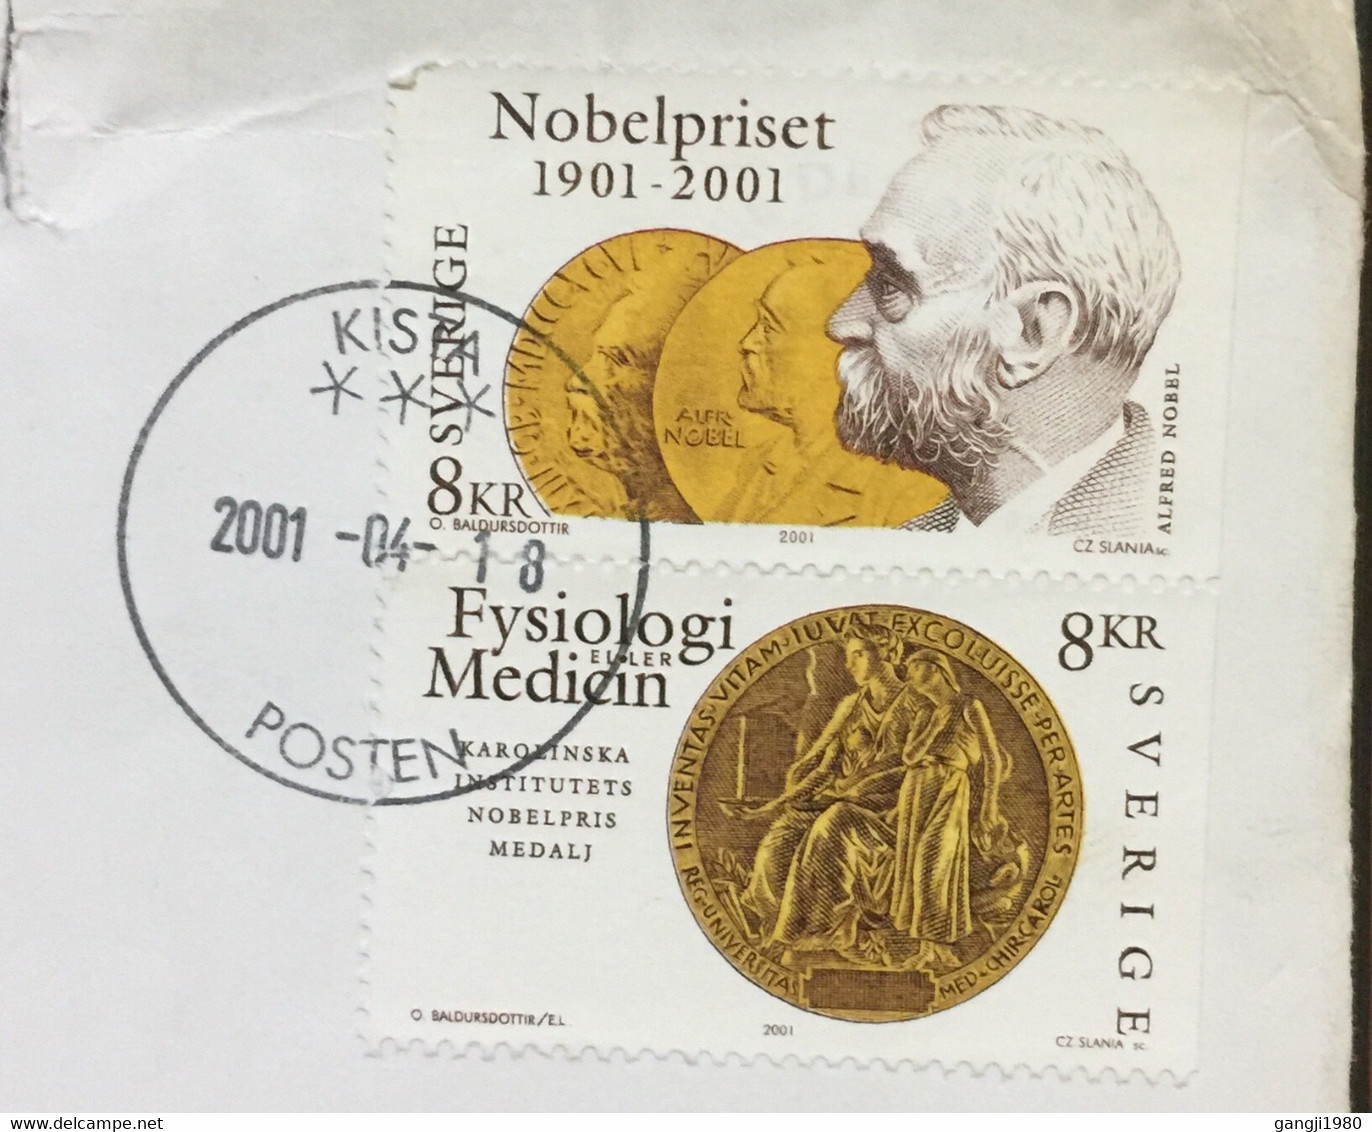 SWEDEN 2001, COVER USED TO INDIA, NOBEL PRIZE & MEDAL, SE TENANT STAMP, KISTA CITY CANCEL,16 KROWN RATE - Covers & Documents